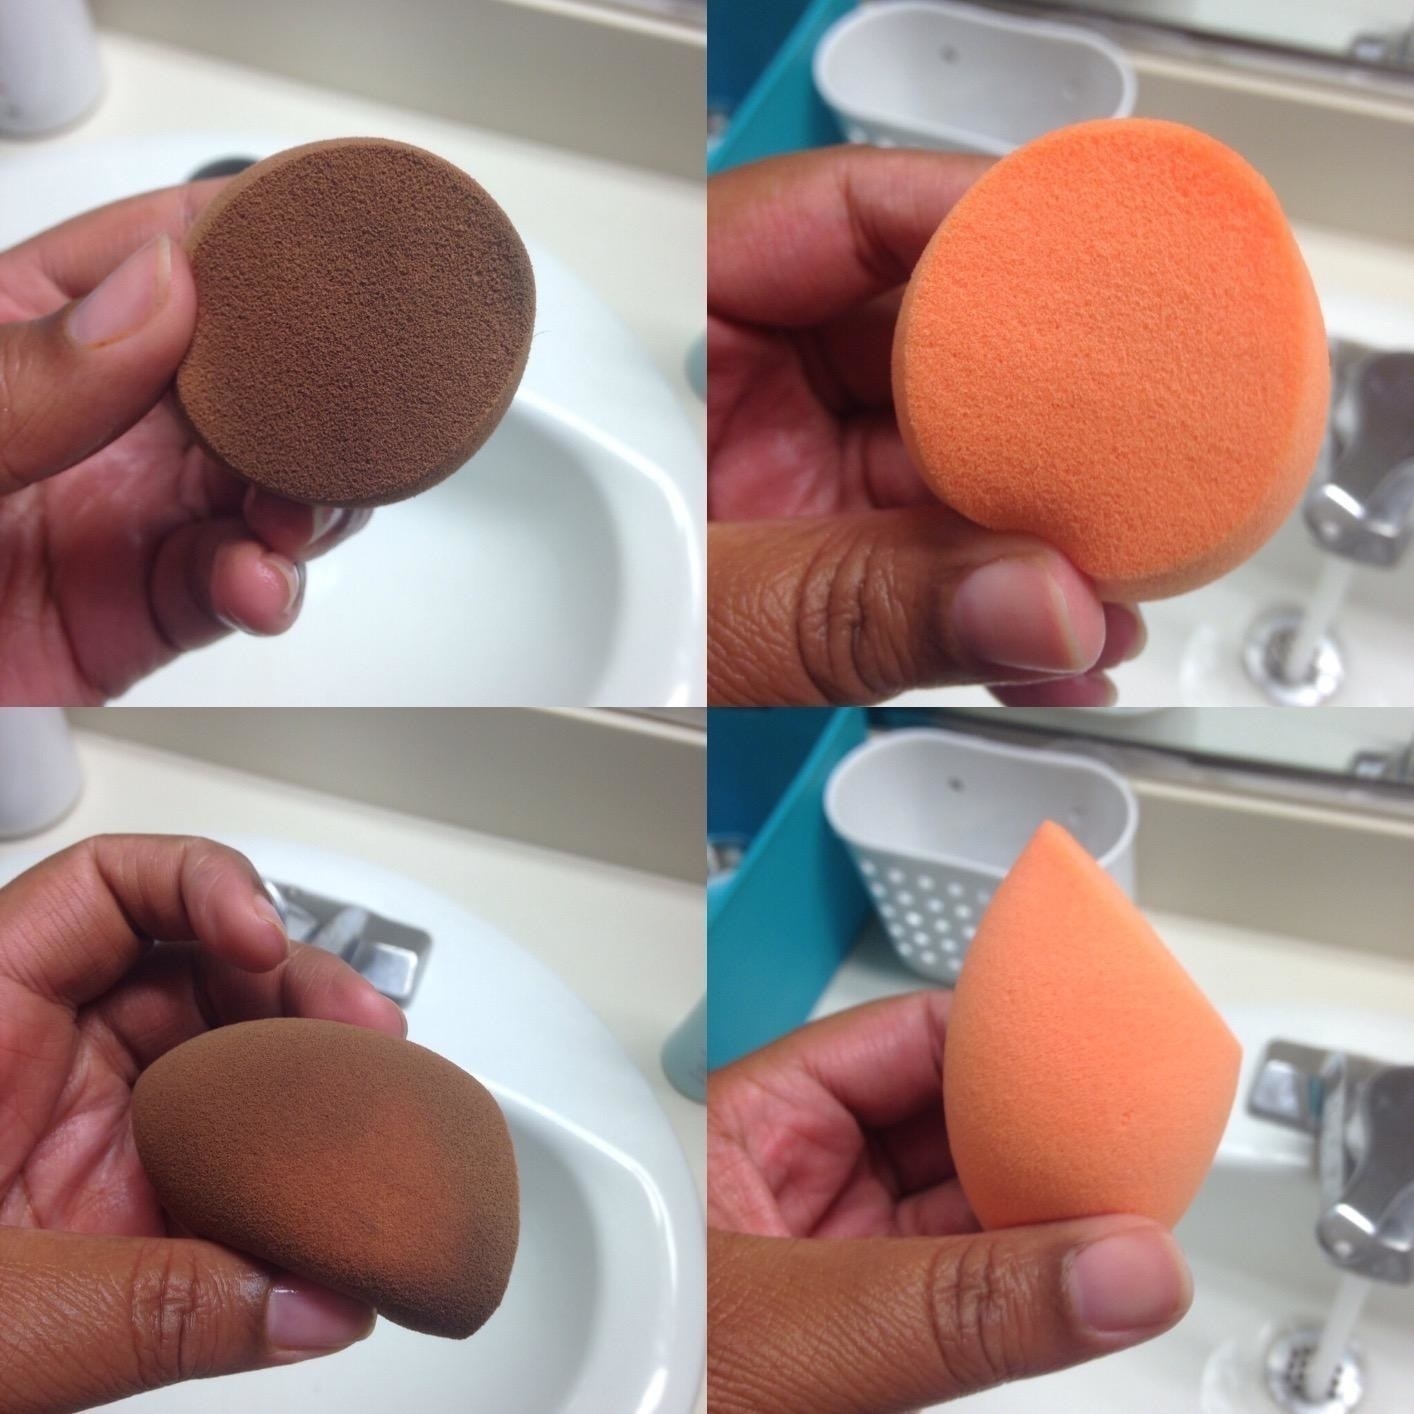 Before: A reviewer&#x27;s makeup sponge, which is dark brown after many uses; and after: the same sponge, now light orange and clean